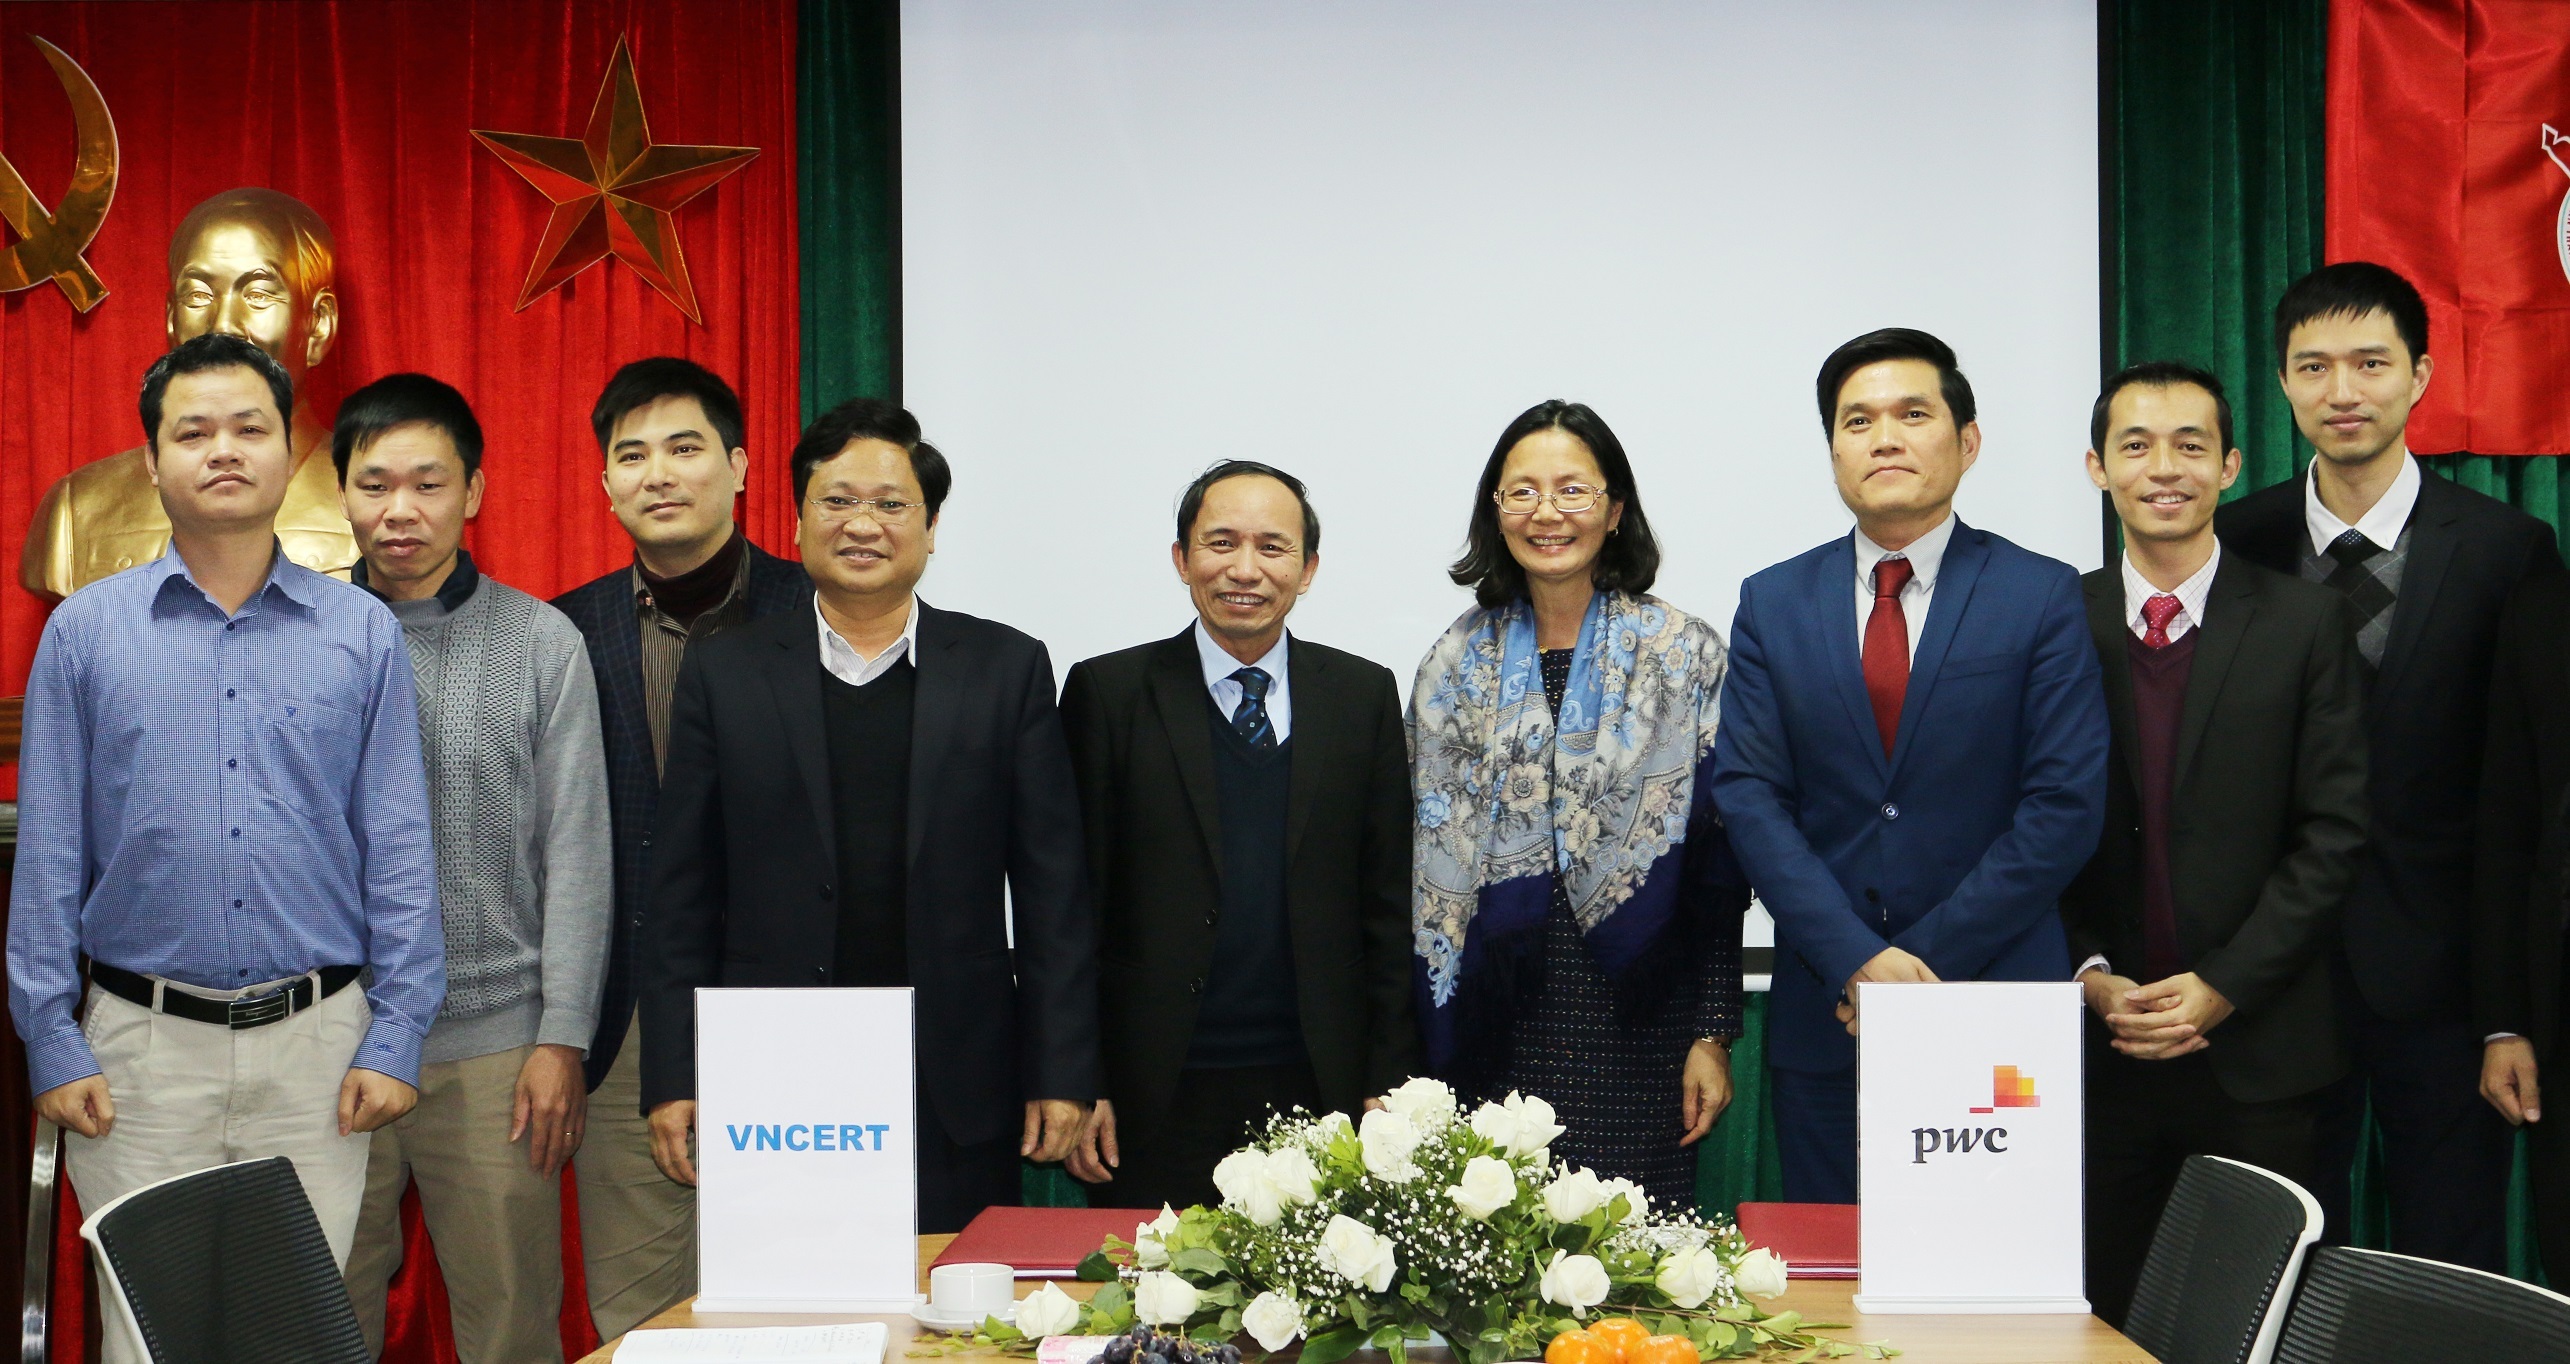 PwC Vietnam and VNCERT form strategic partnership for cyber security incident response